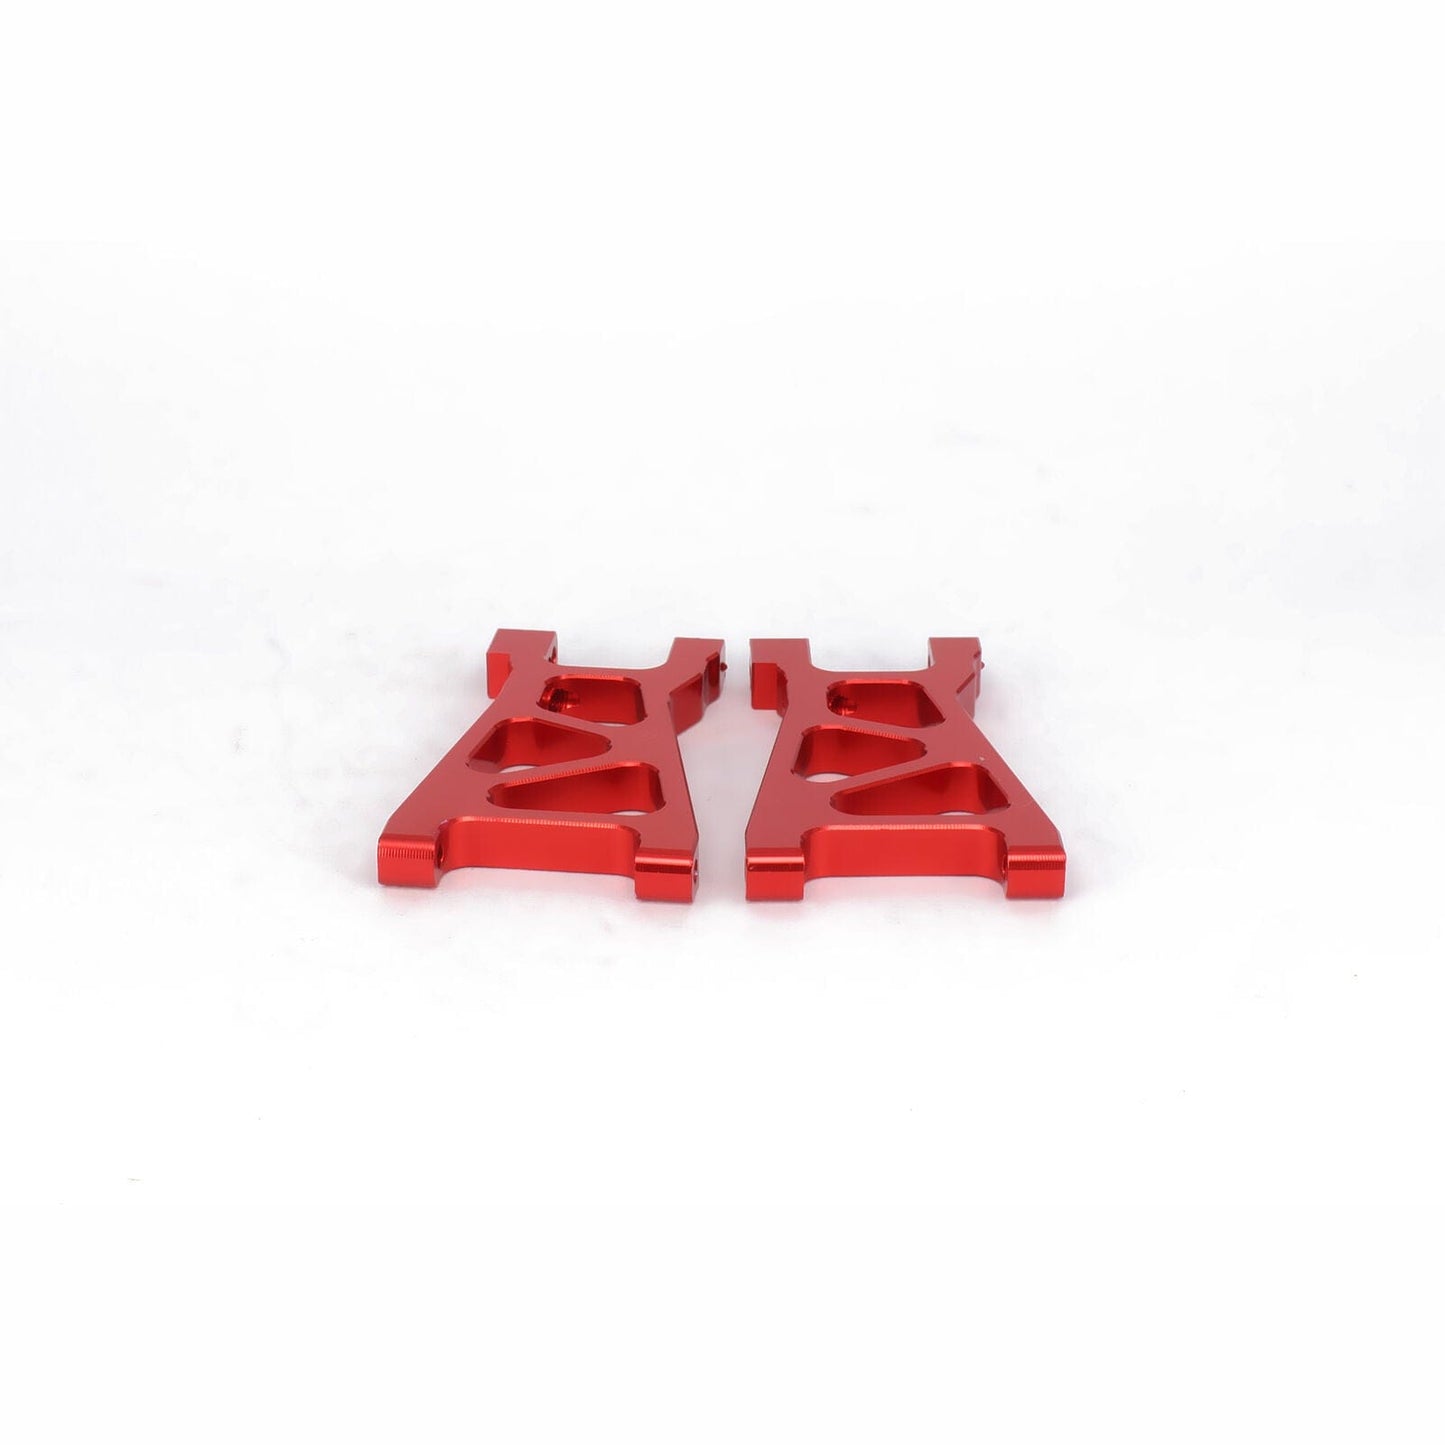 RCAWD HIMOTO UPGRADE PARTS Red RCAWD Himoto E18 upgrade Alloy Rear Lower Suspension Arm M606 23606